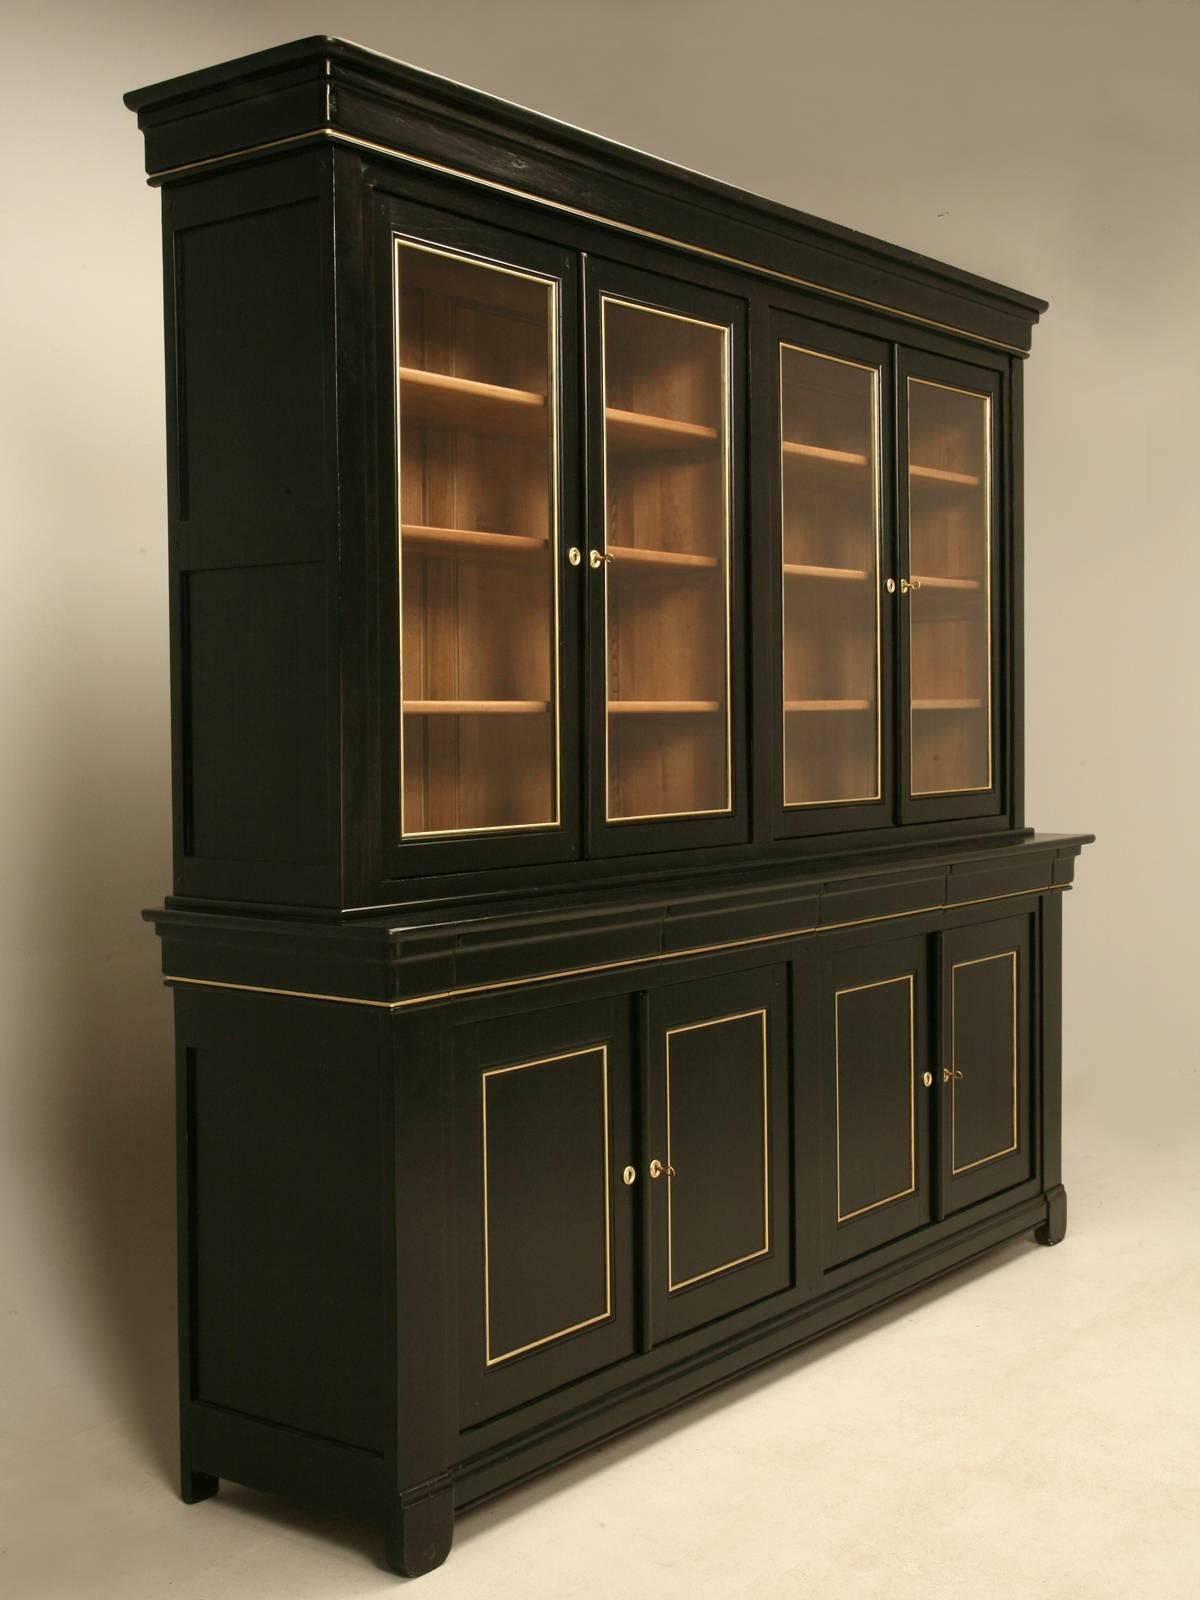 French inspired Louis Philippe style grand bookcase in an ebonized finish with gold detailing. Our workshop copied an original Louis Philippe bookcase and are offering them in any dimension or finish. Handmade in Chicago this bookcase was made from